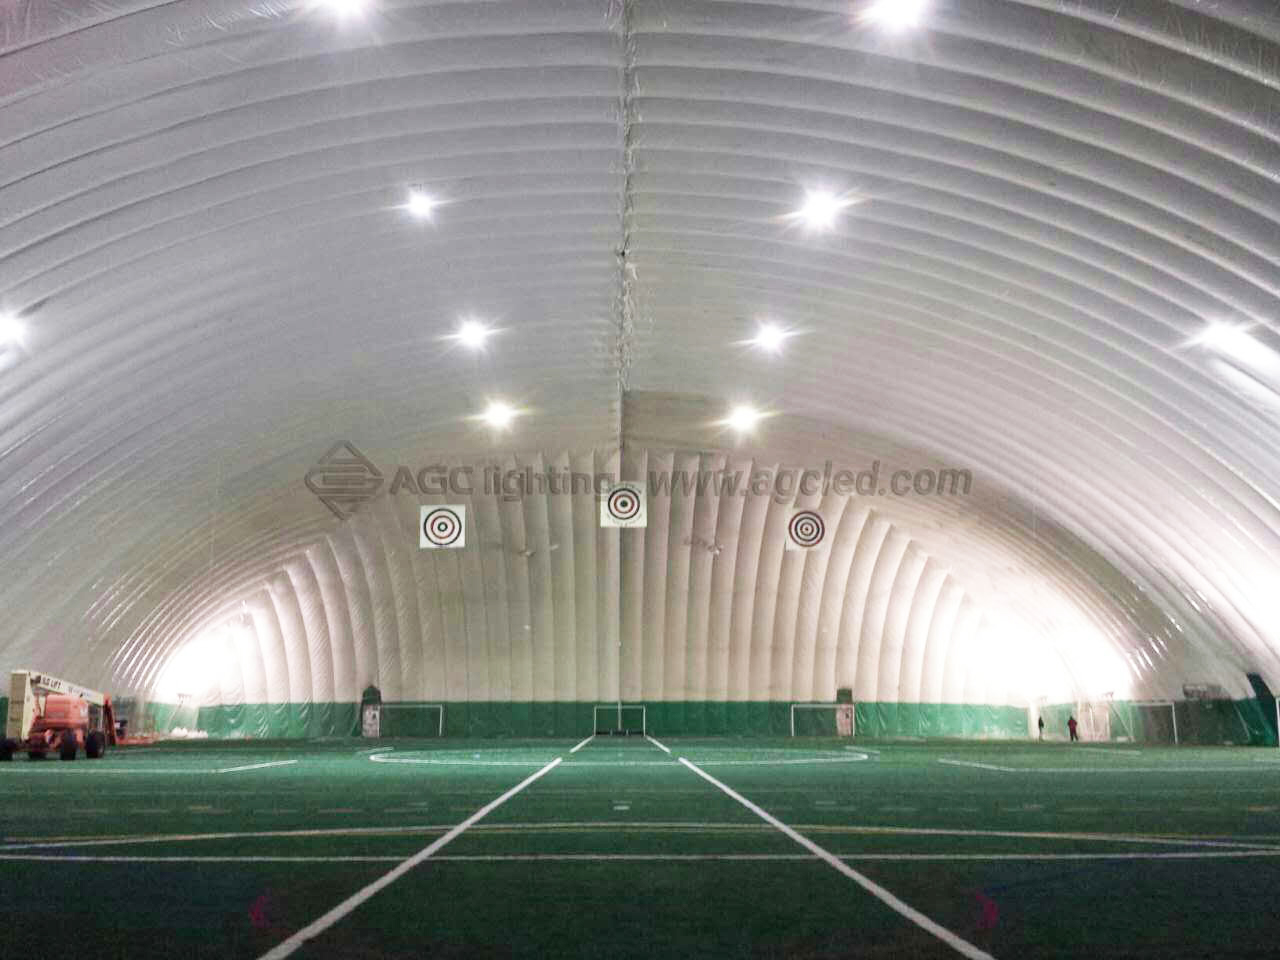 300W High Bay Light Apply to Sports Air Dome